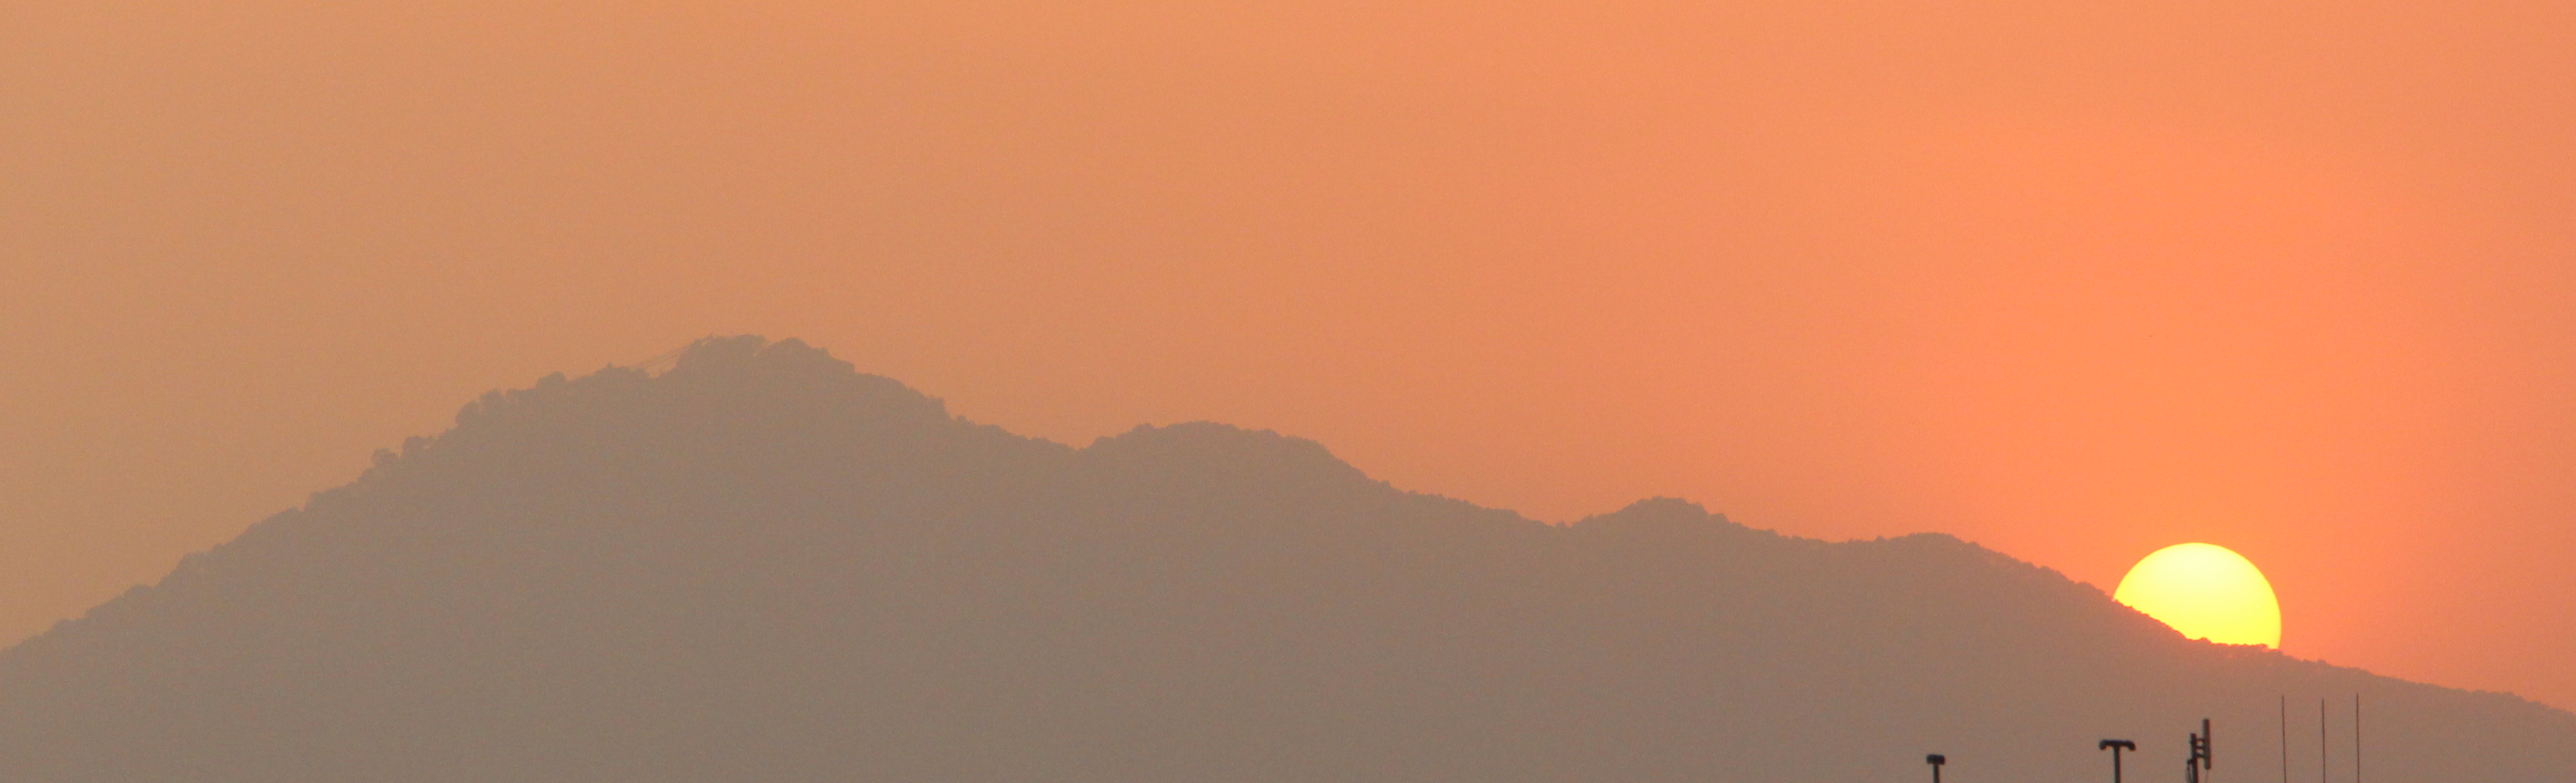 Whole Nepal Is Perfect to Watch the Sunset and Sunrise: View From